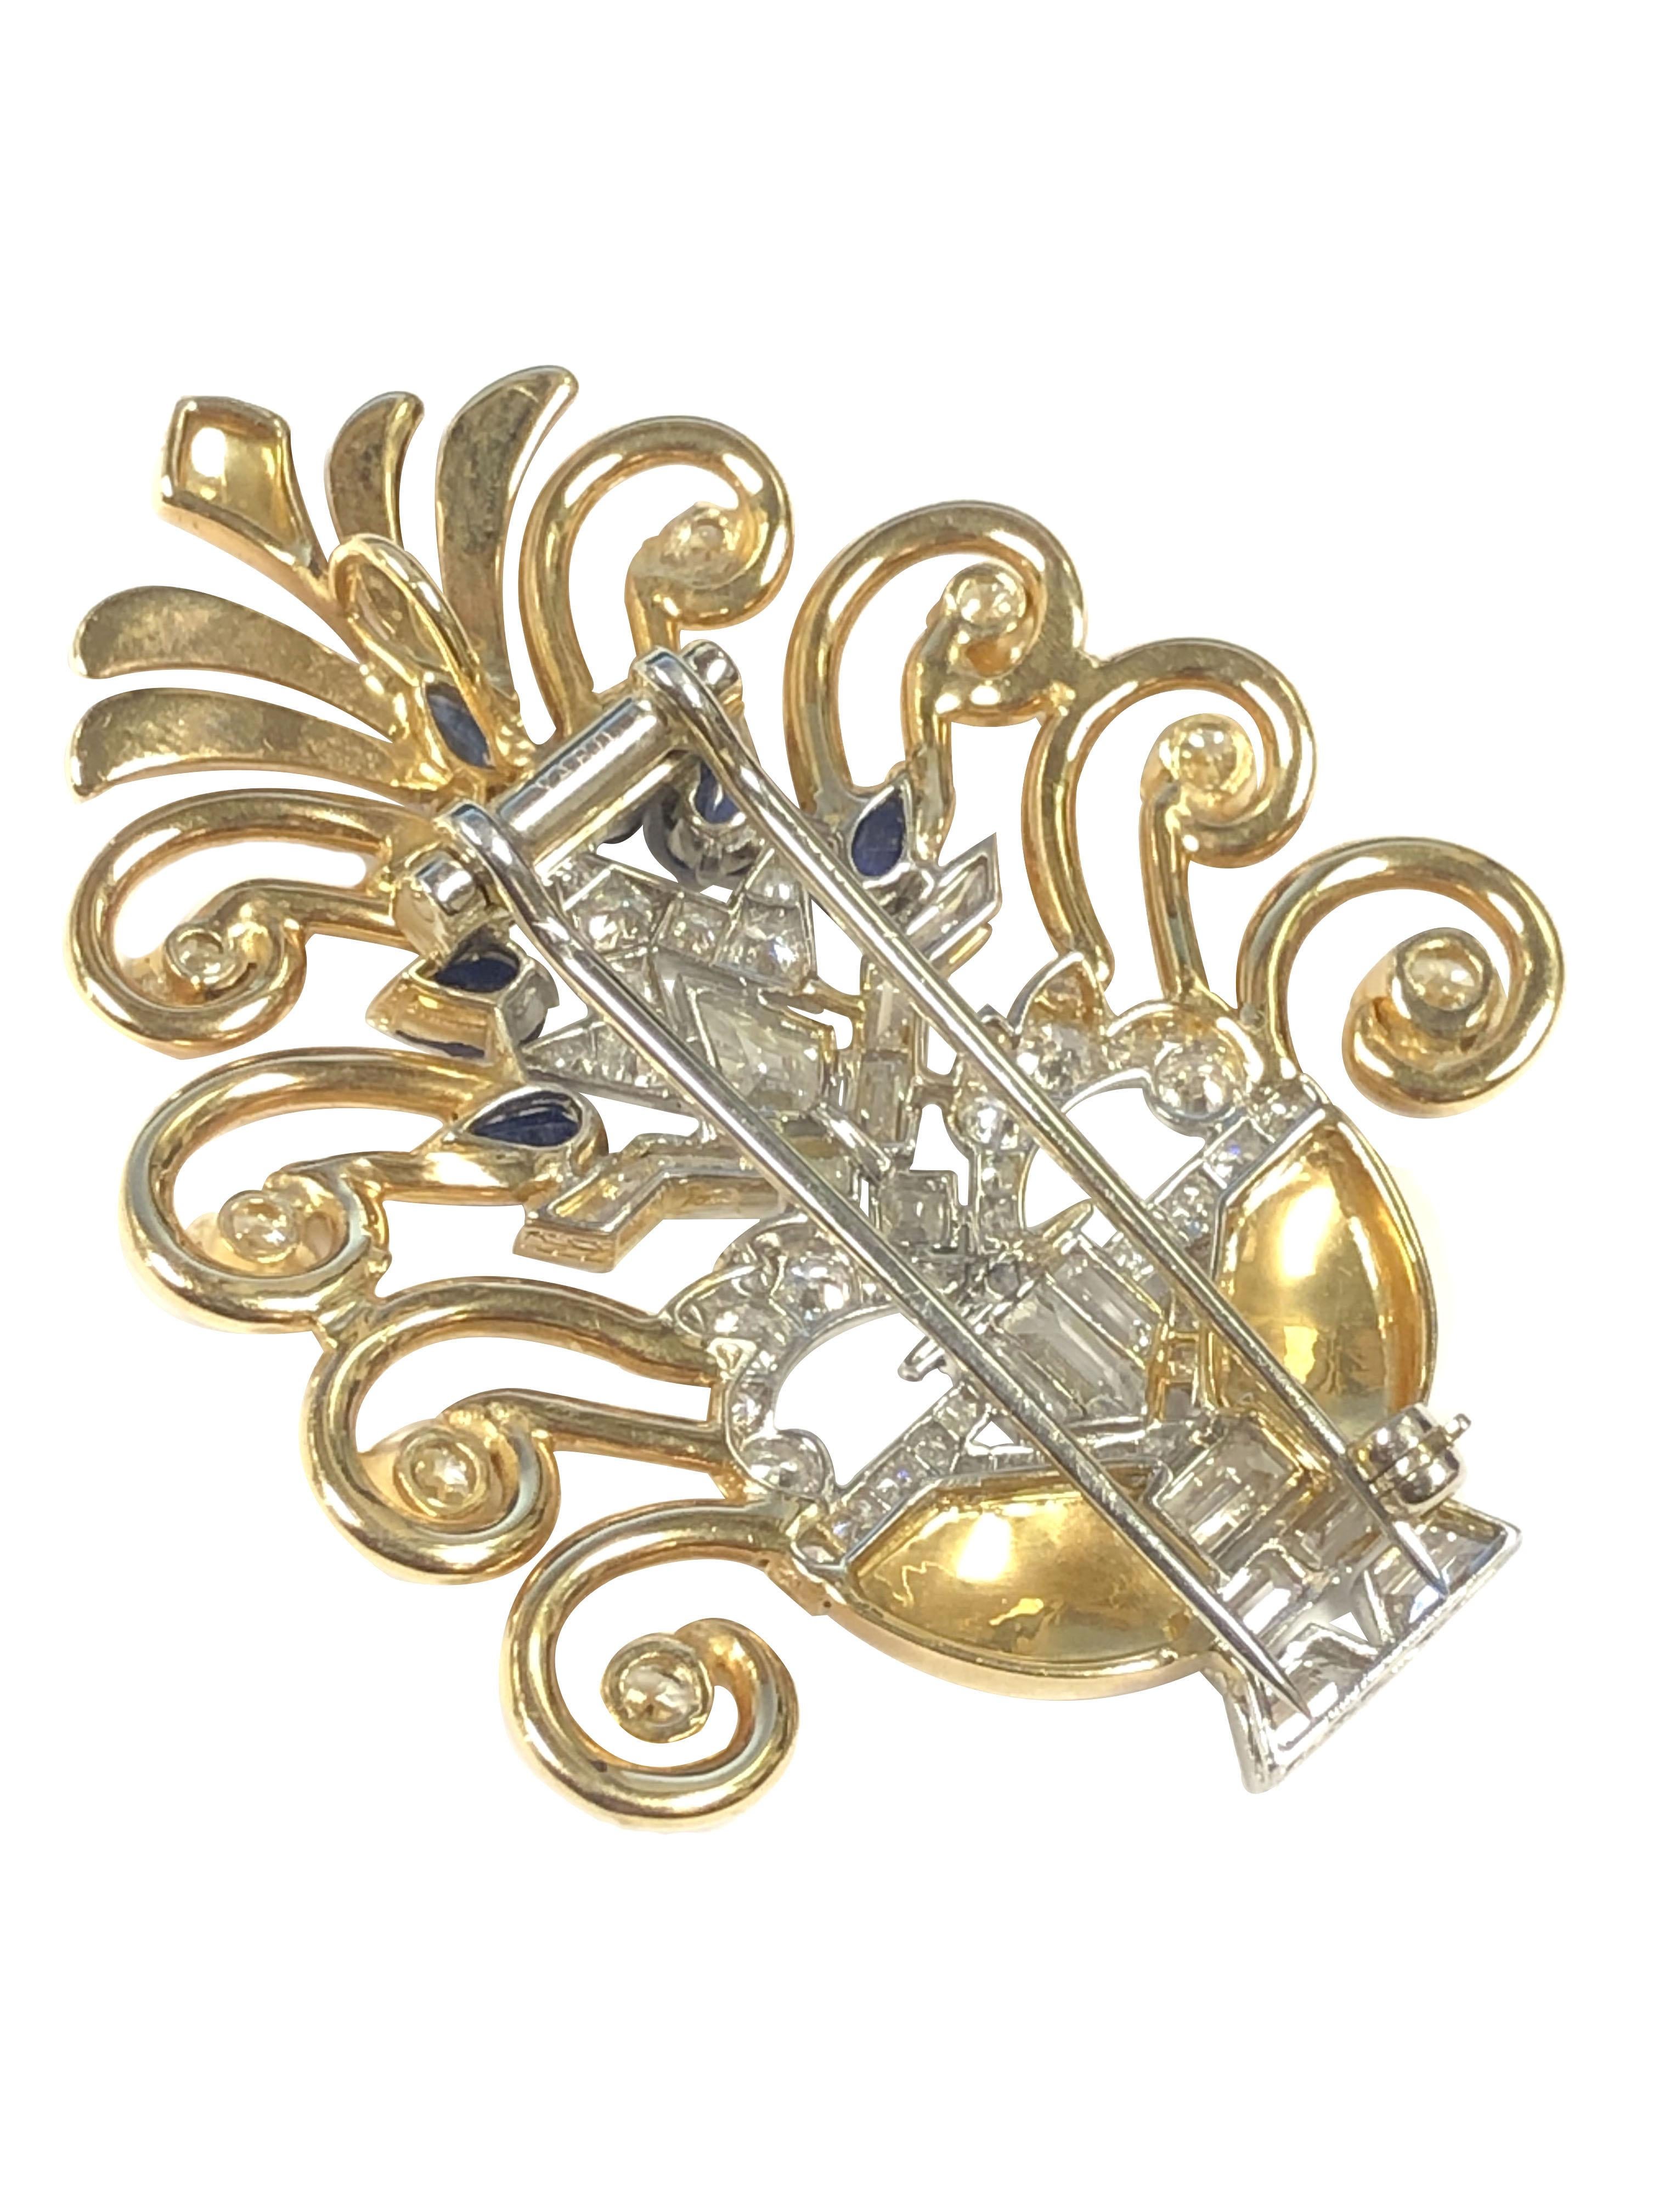 Circa 1930s Raymond Yard Platinum and 14K Yellow Gold Brooch in a very High Art Deco style of a Planter, measuring 2 1/8 inches in length X 1 3/4 inches, set with Round, Baguette, Kite and French cut Diamonds totaling 2 Carats and further set with